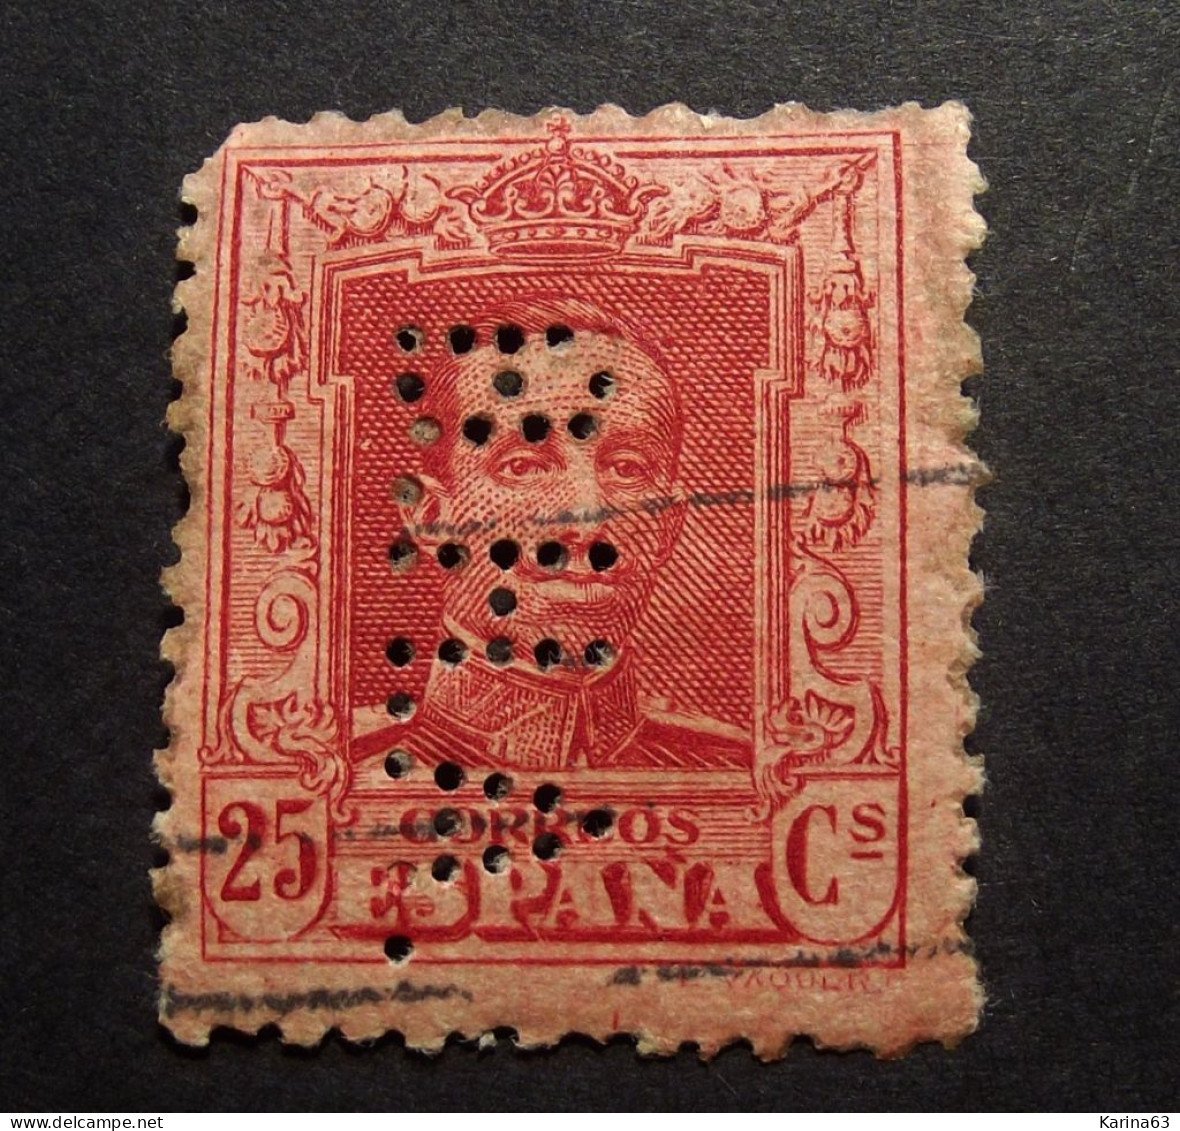 Espana - Spain - Alfonso XIII -  Perfin - Lochung  With Number -  B.H.A. -  Banco Hispano Americano - Madrid - Cancelled - Used Stamps